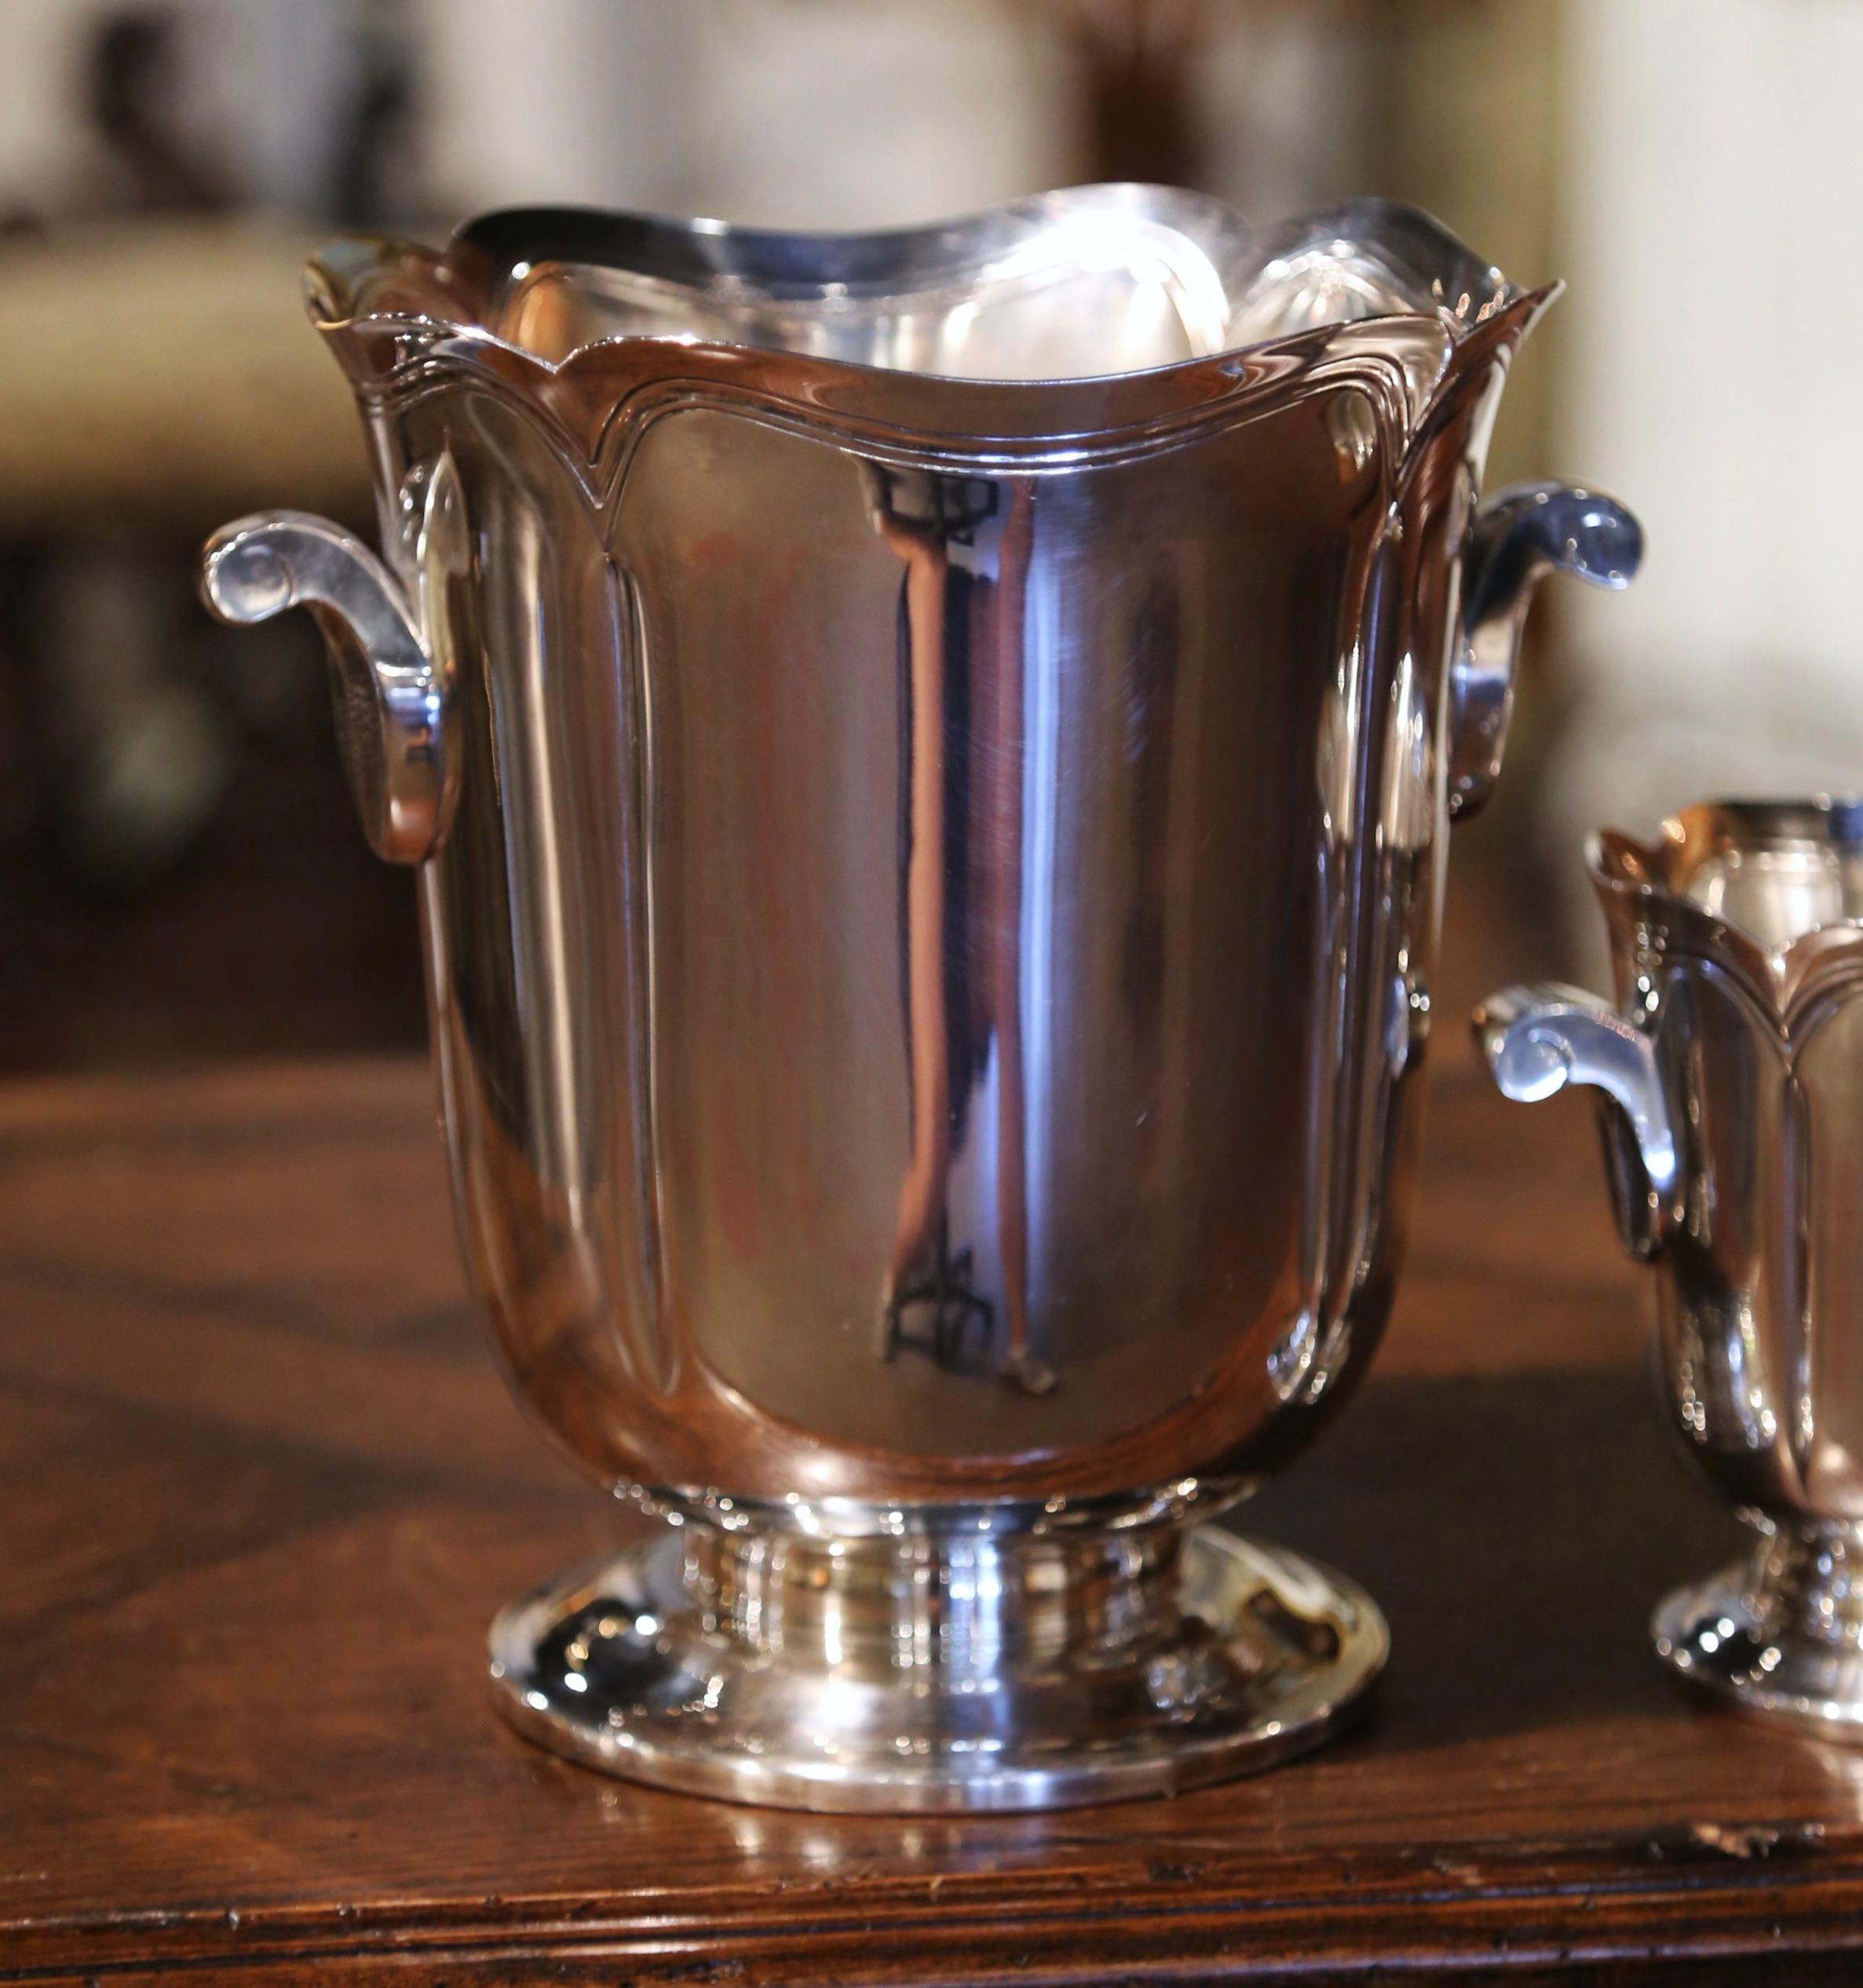 Serve champagne or white wine in style in this elegant 